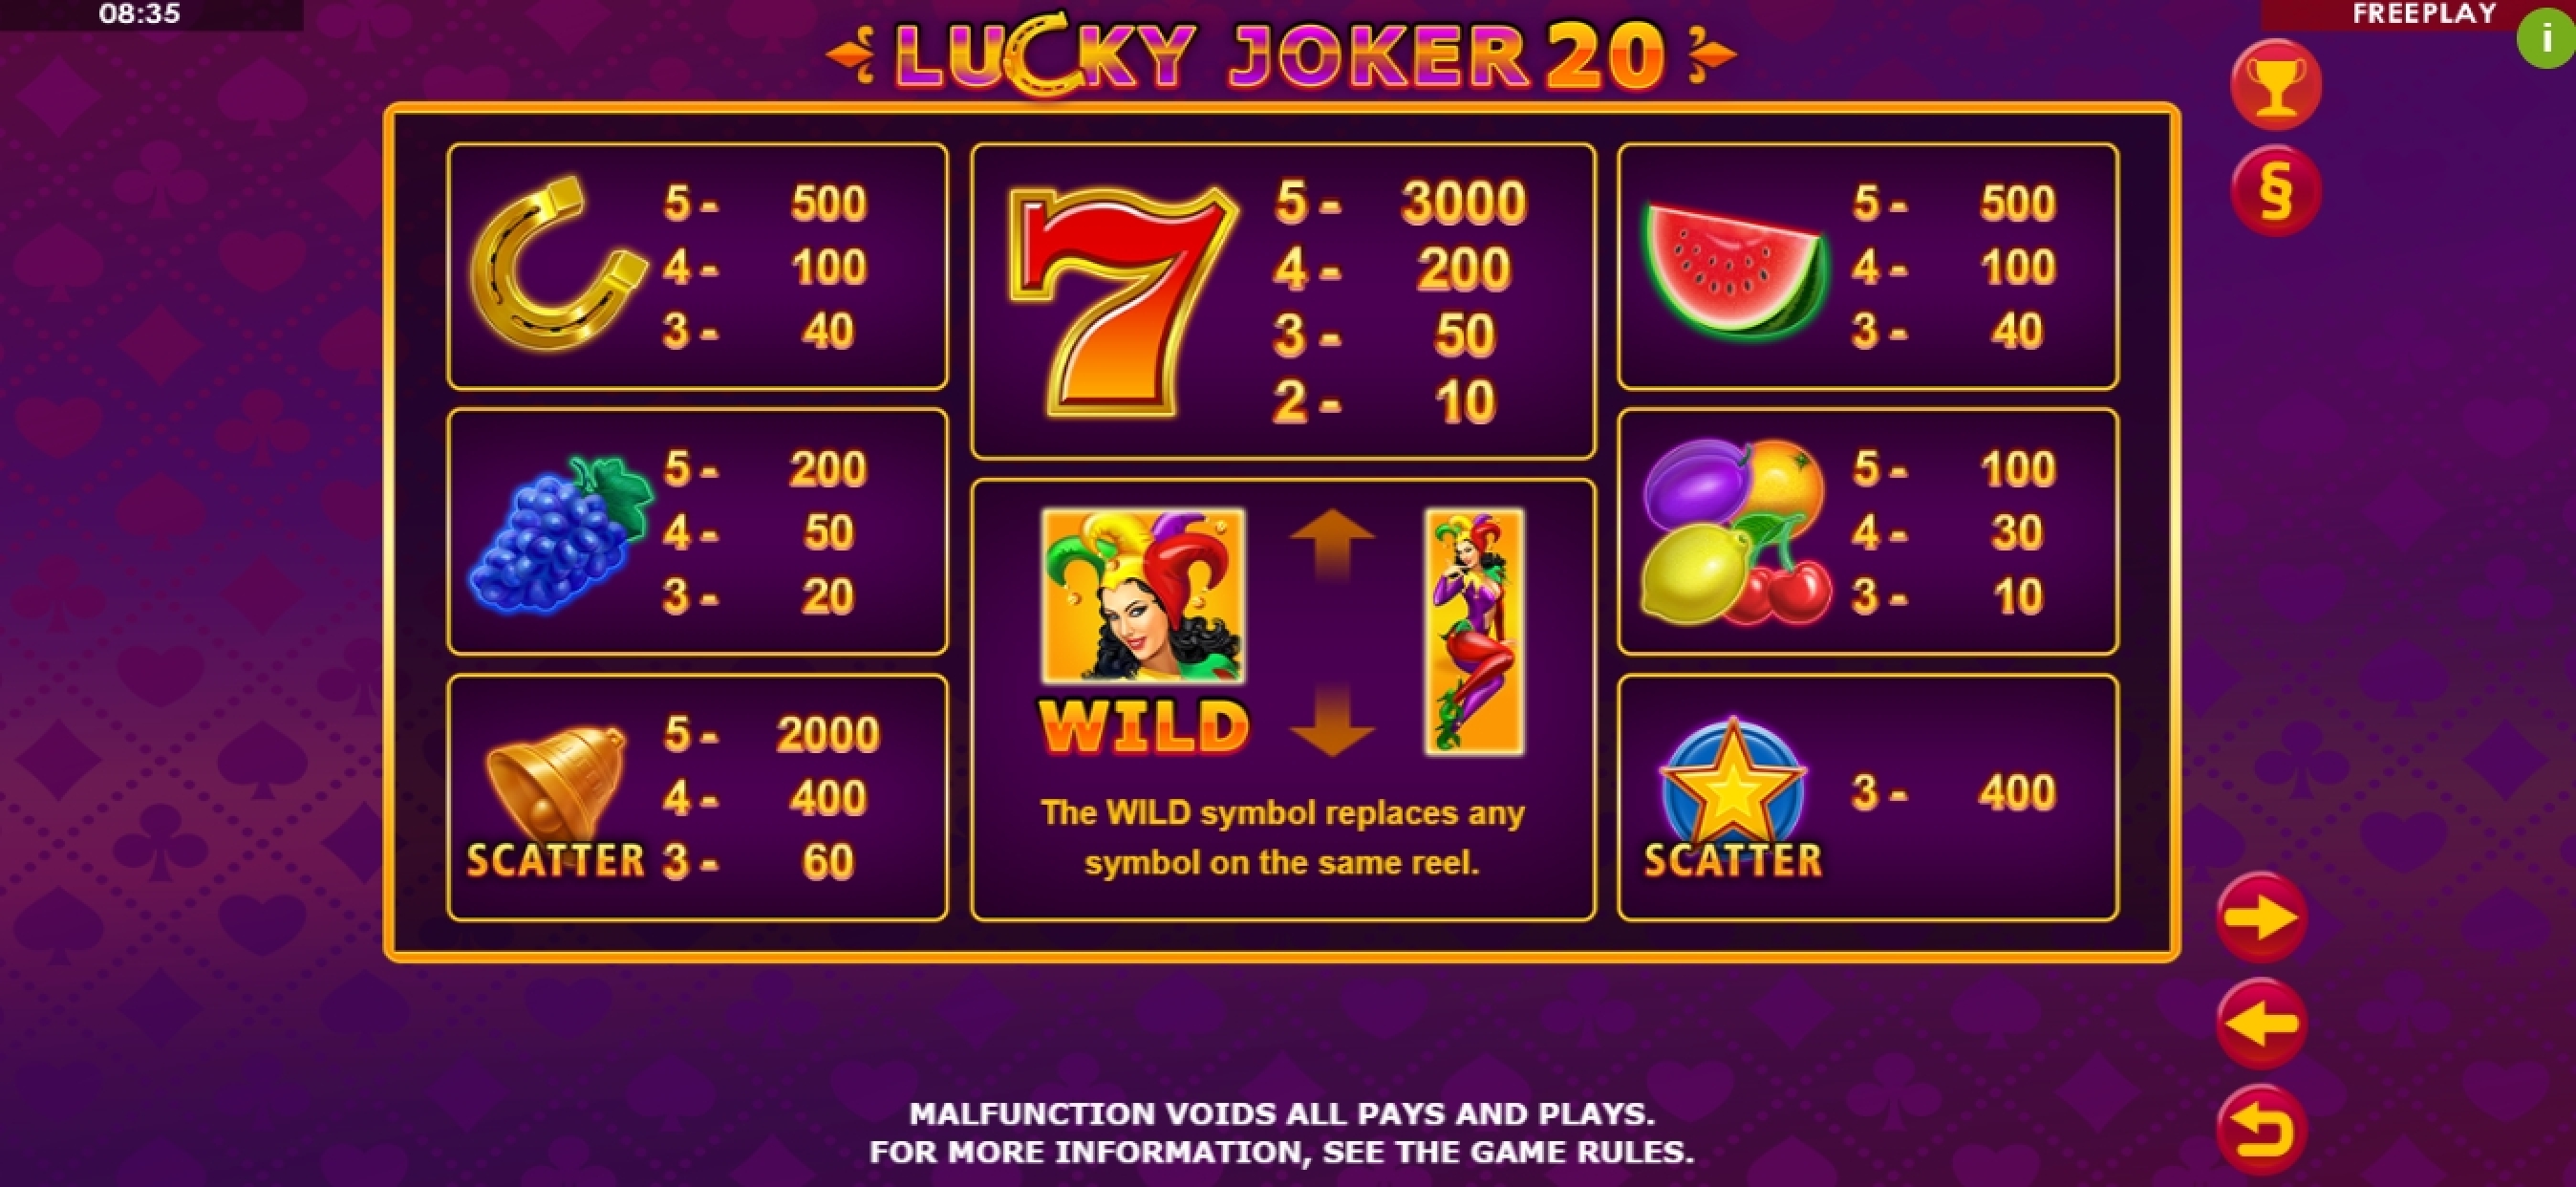 Info of Lucky Joker 20 Slot Game by Amatic Industries